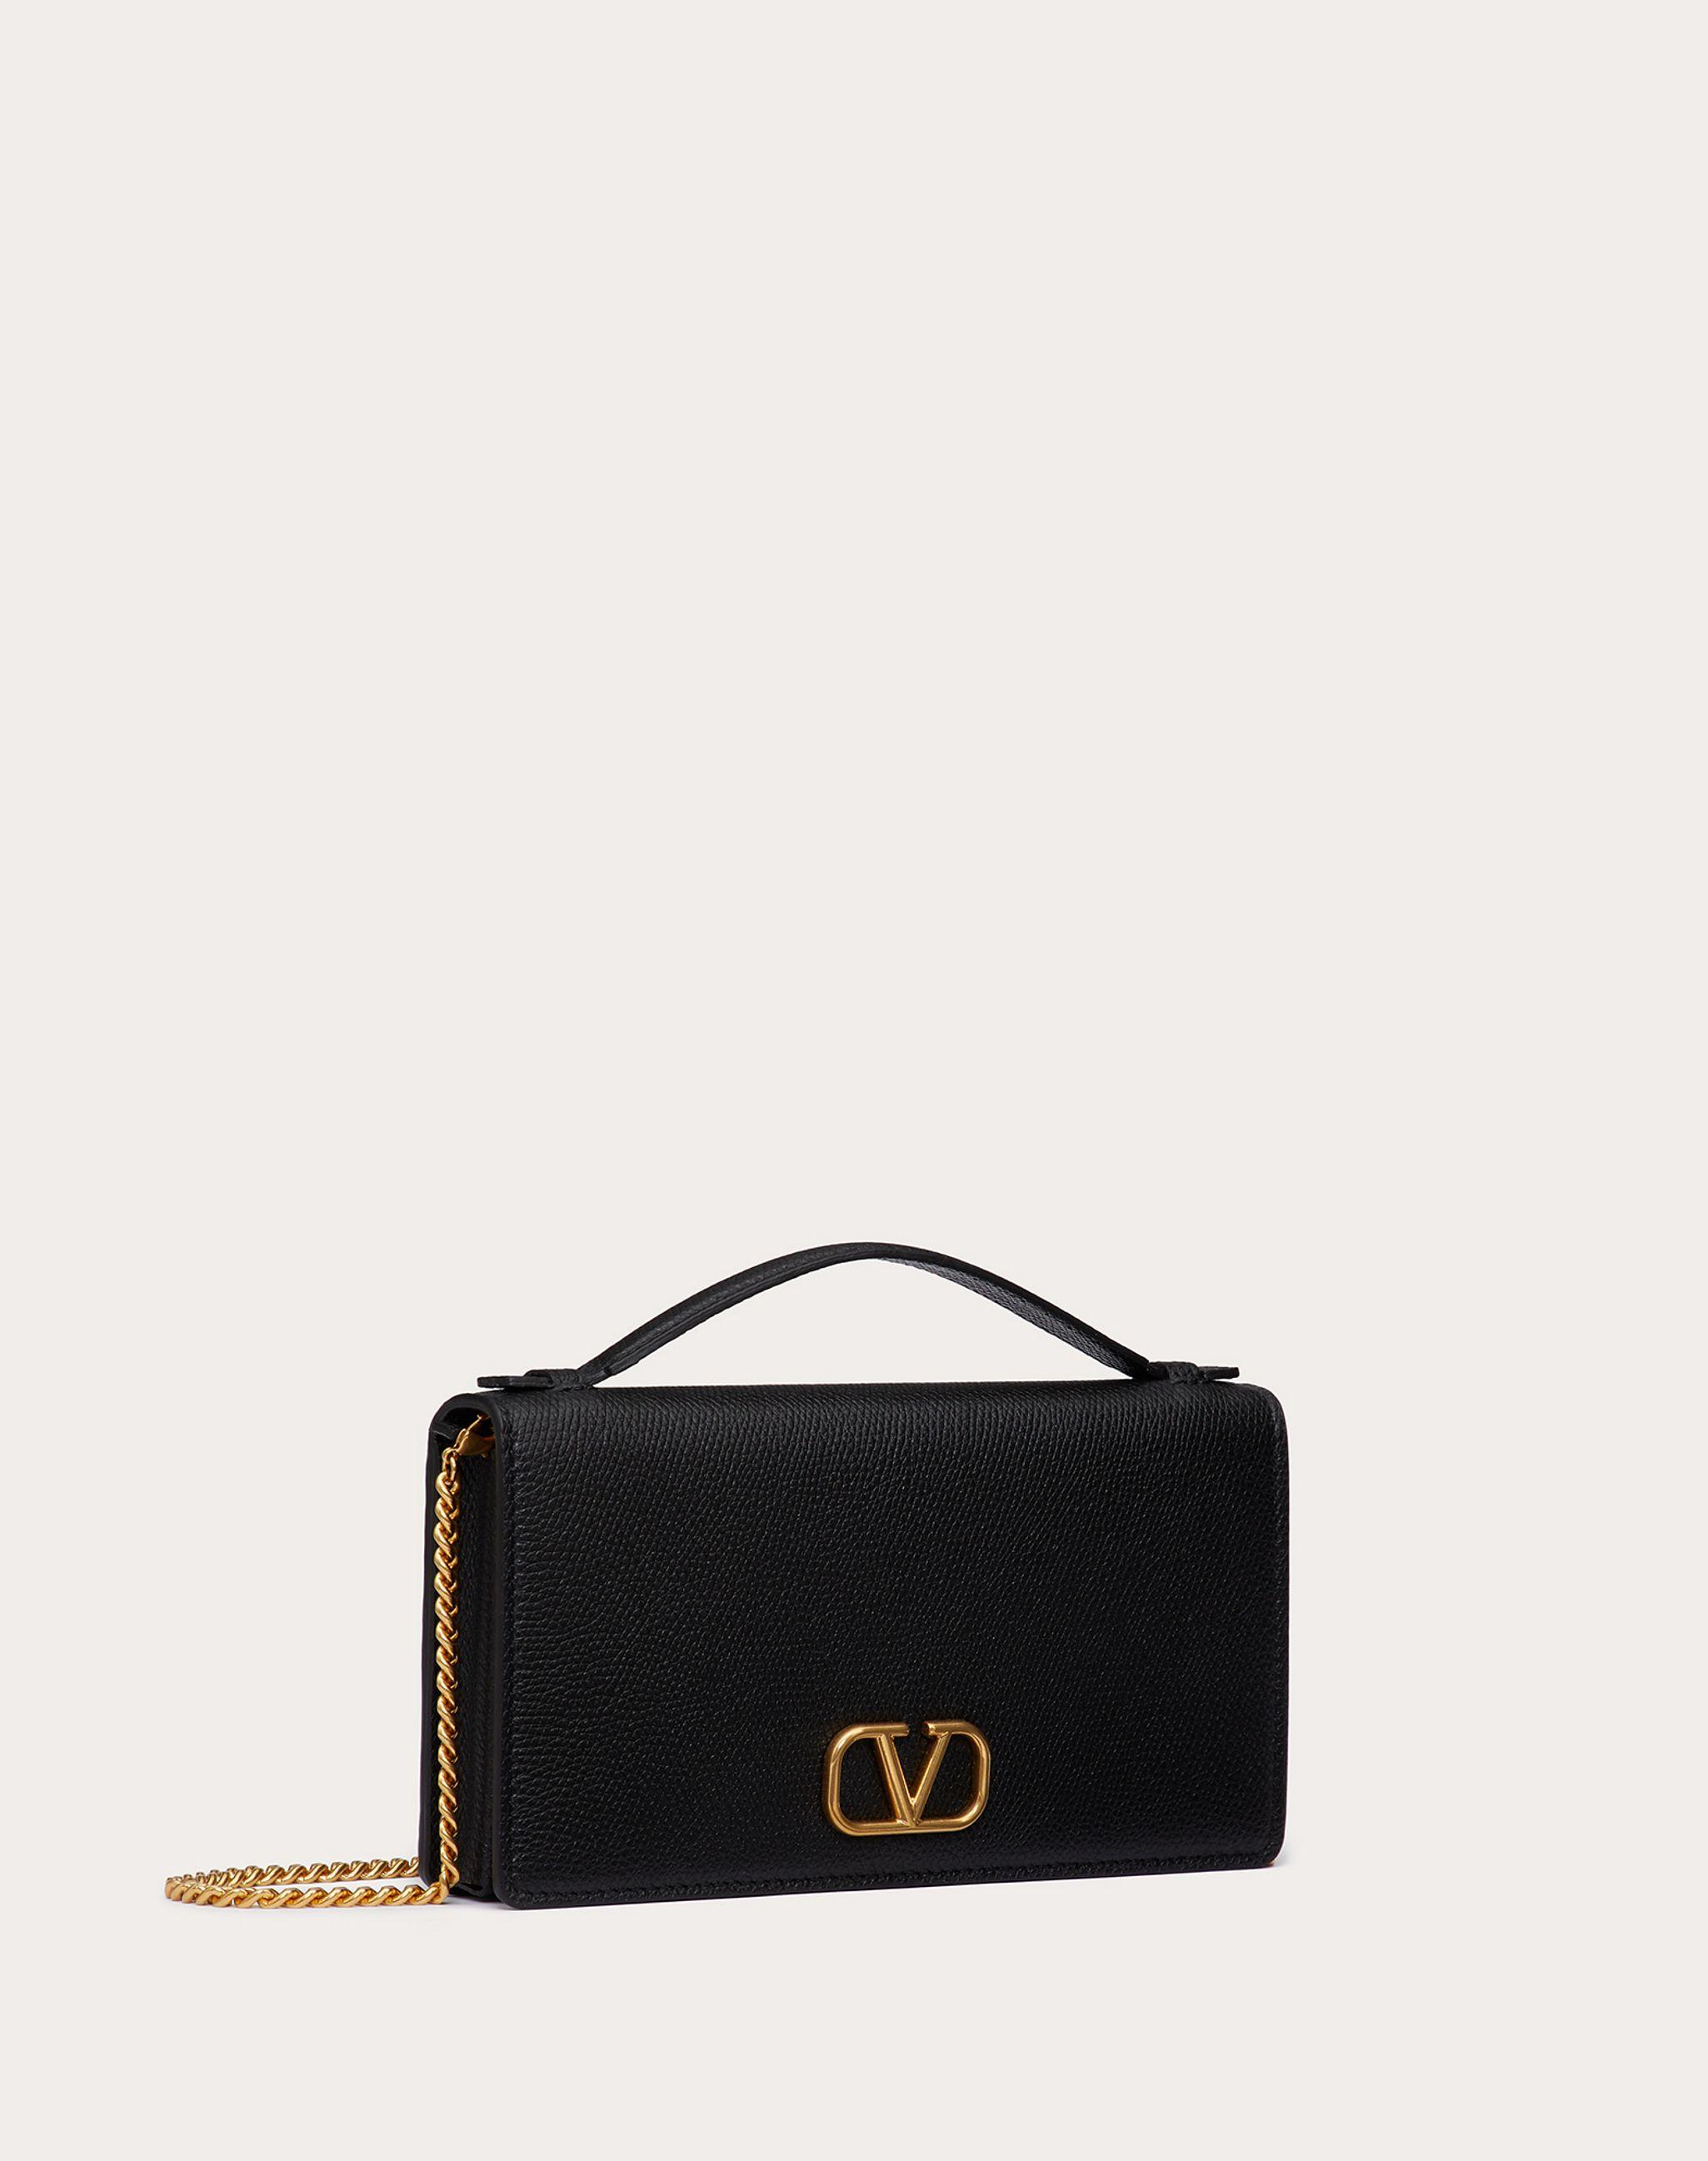 VLOGO SIGNATURE WALLET WITH CHAIN IN RAFFIA AND METALLIC CALFSKIN LEATHER